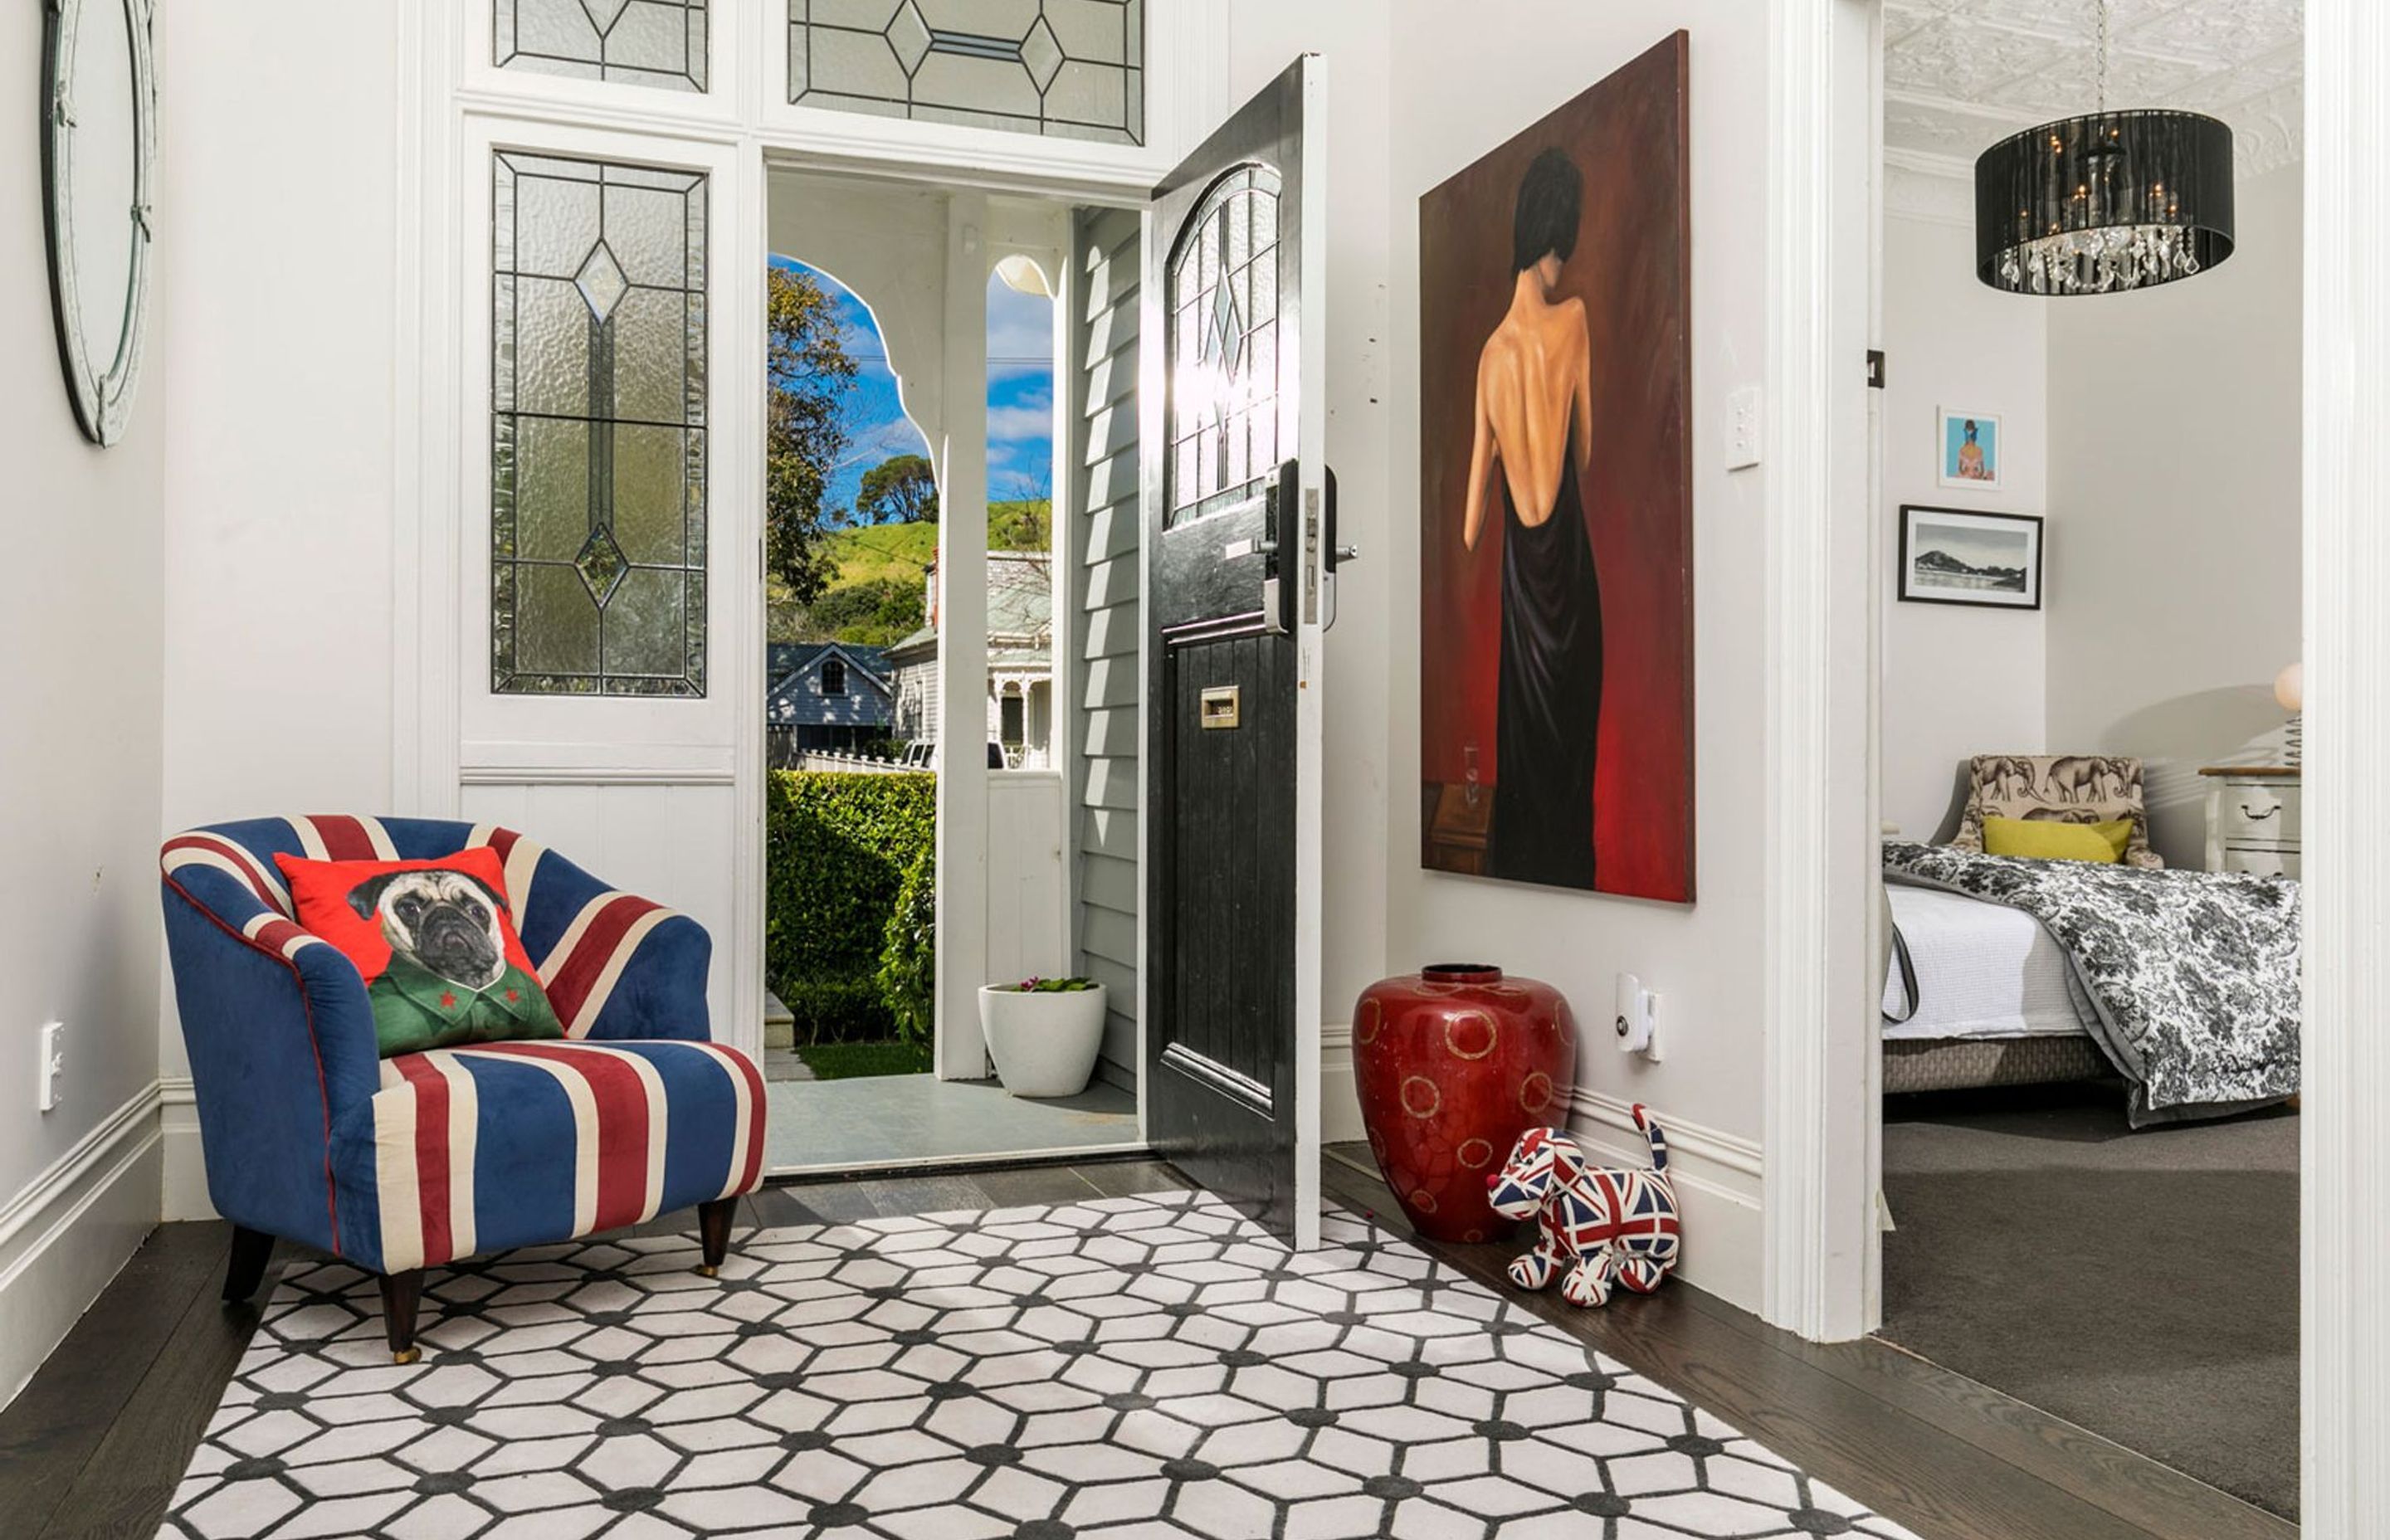 The eclectic entrance held a nod to the clients english heritage, and the custom designed rug echoed the pattern in the stained glass with it's diamond shapes.